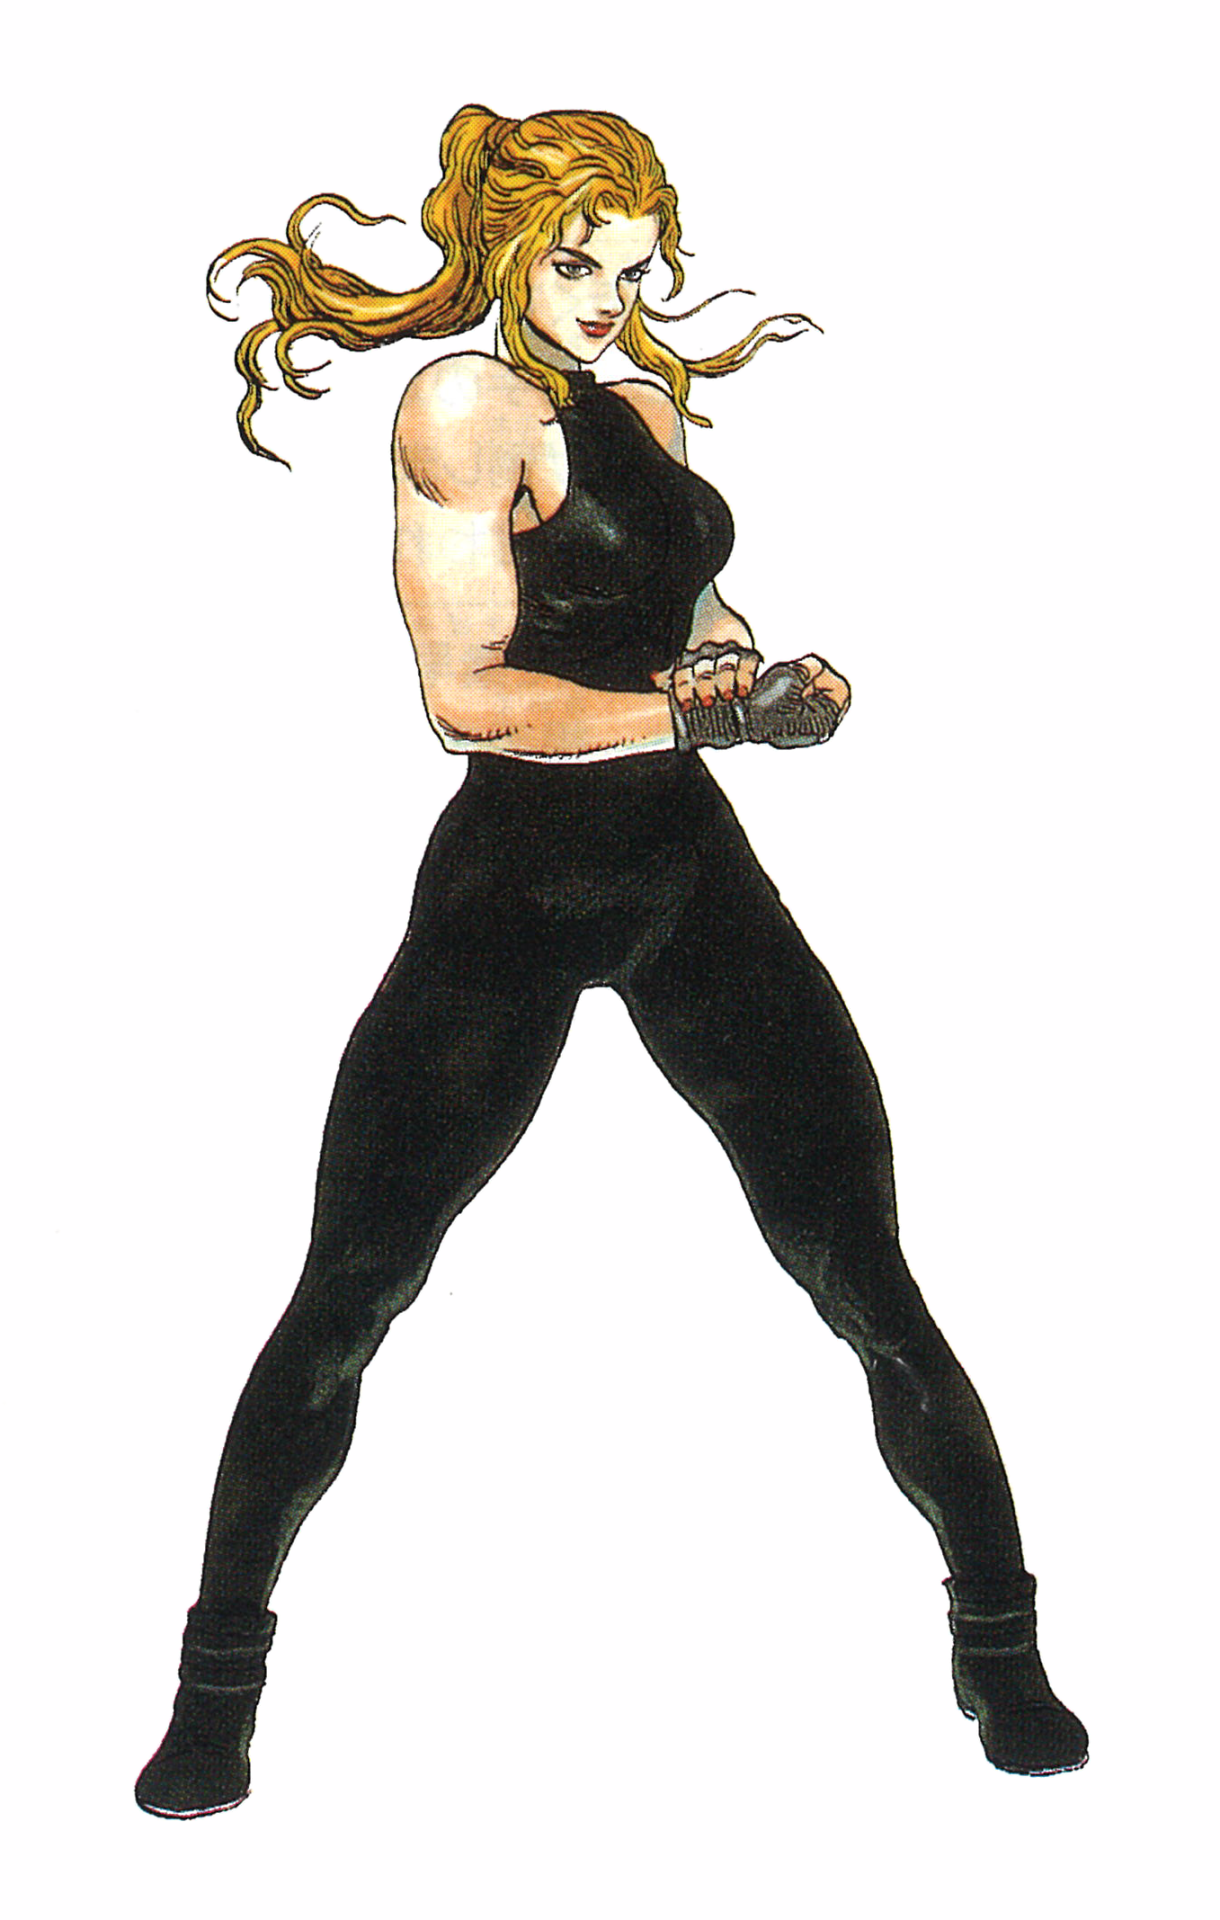 thevideogameartarchive:  The final update for the original Virtua Fighter - Sarah